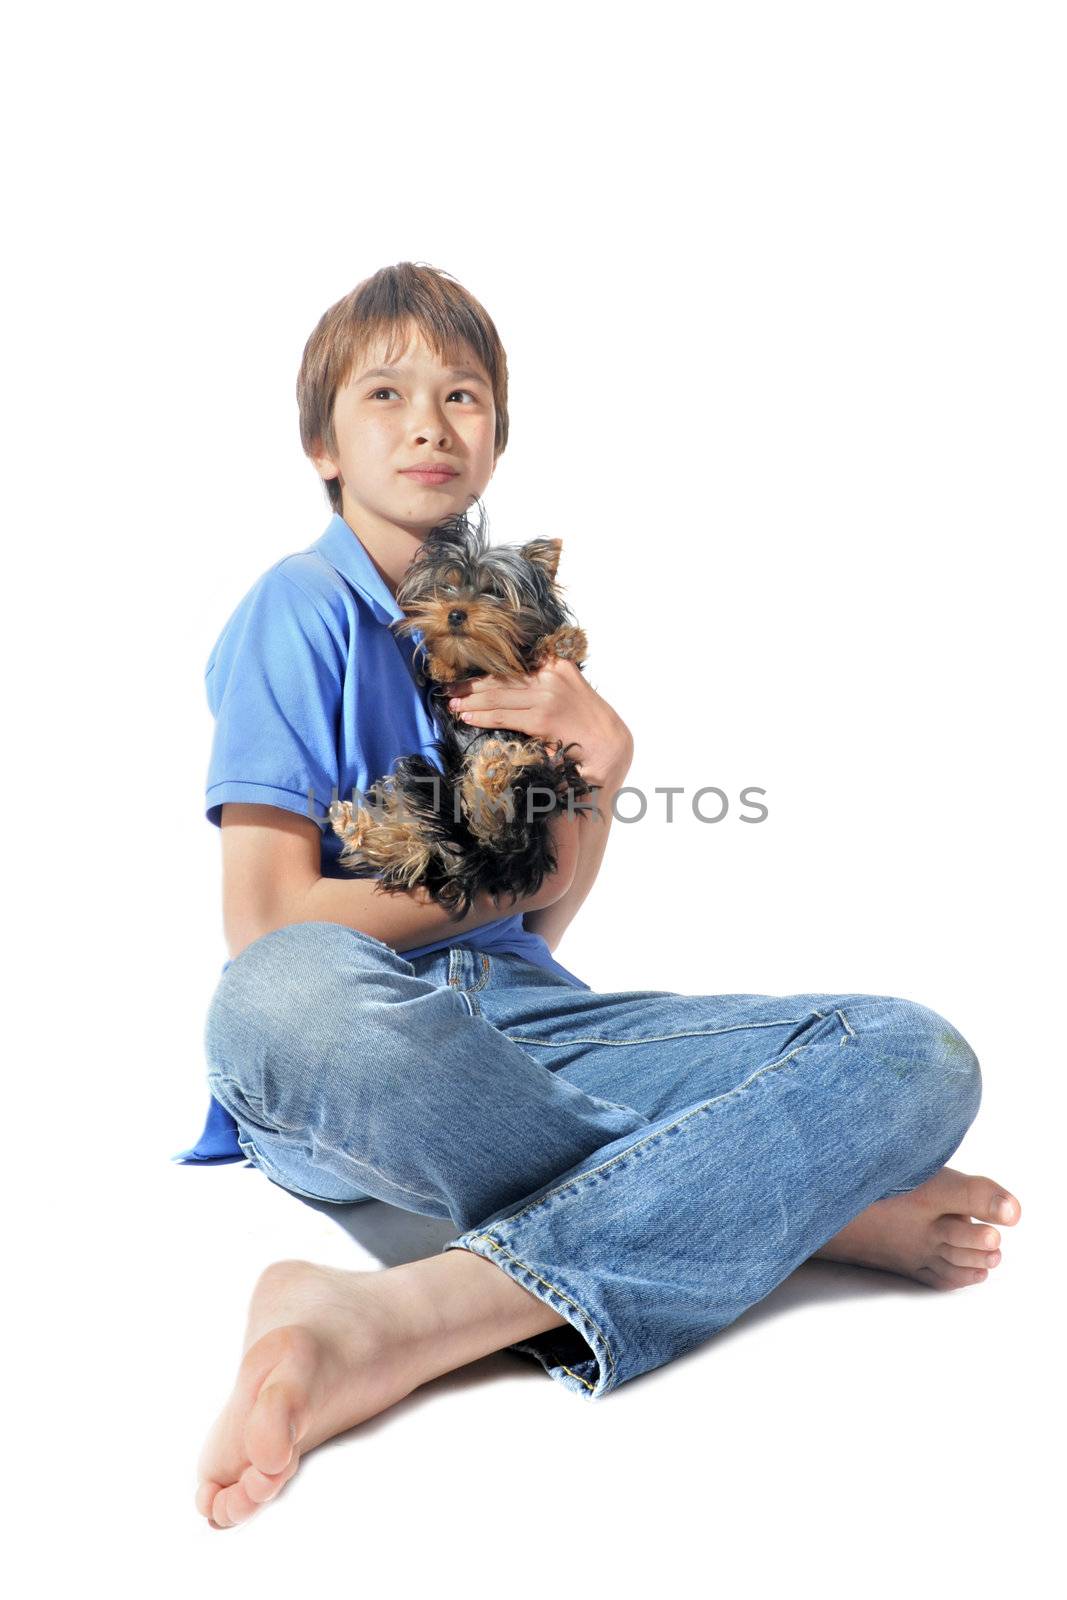 yorkshire terrier and young boy by cynoclub